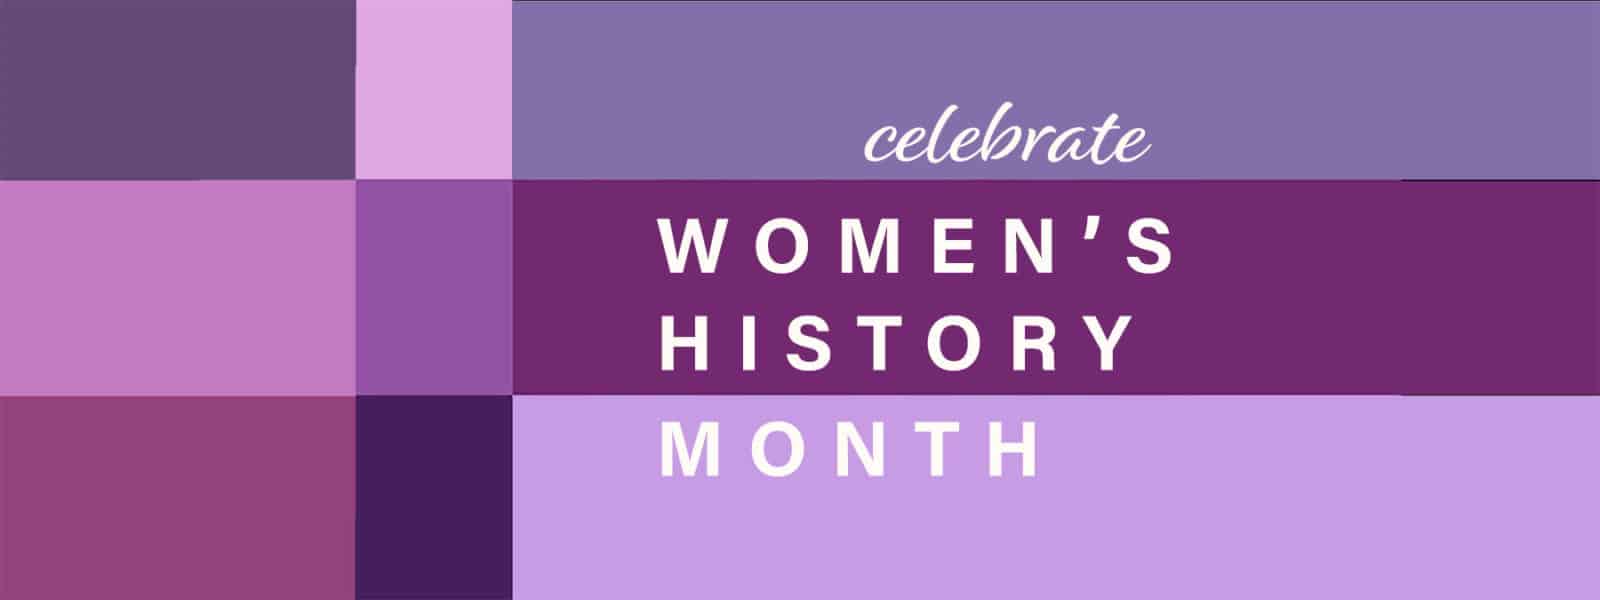 Celebrate Women's History Month with San Diego Museums - San Diego Museum  Council